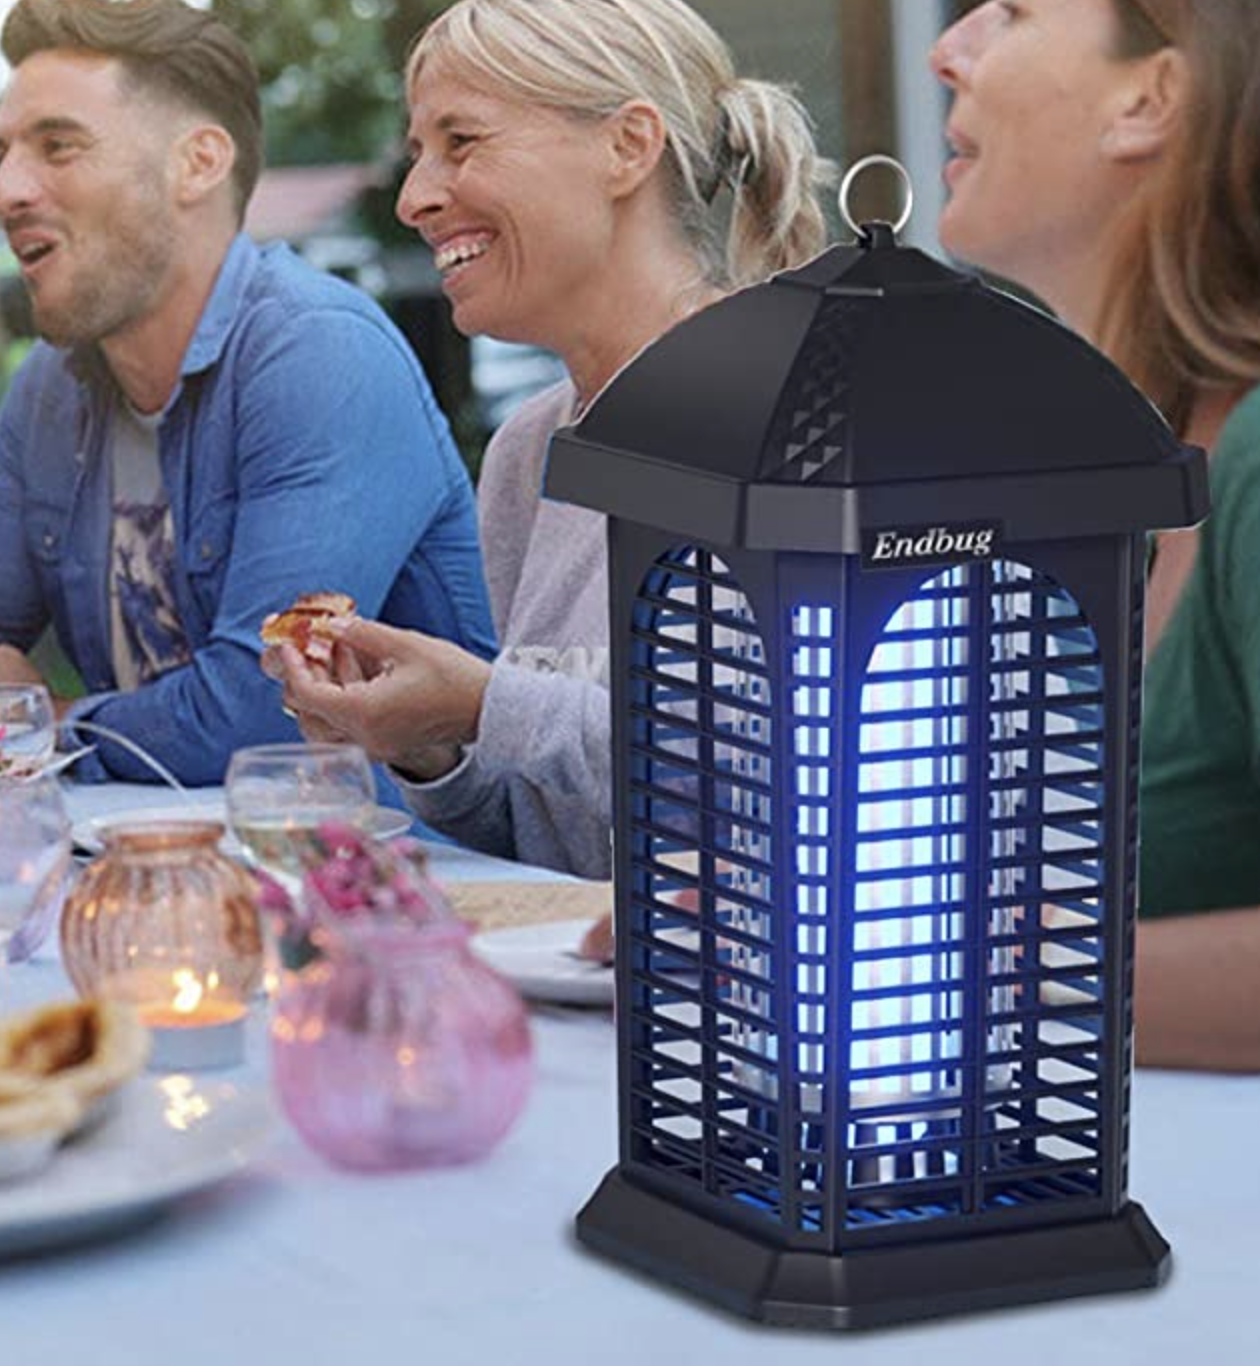 the bug zapper on a table next to people eating